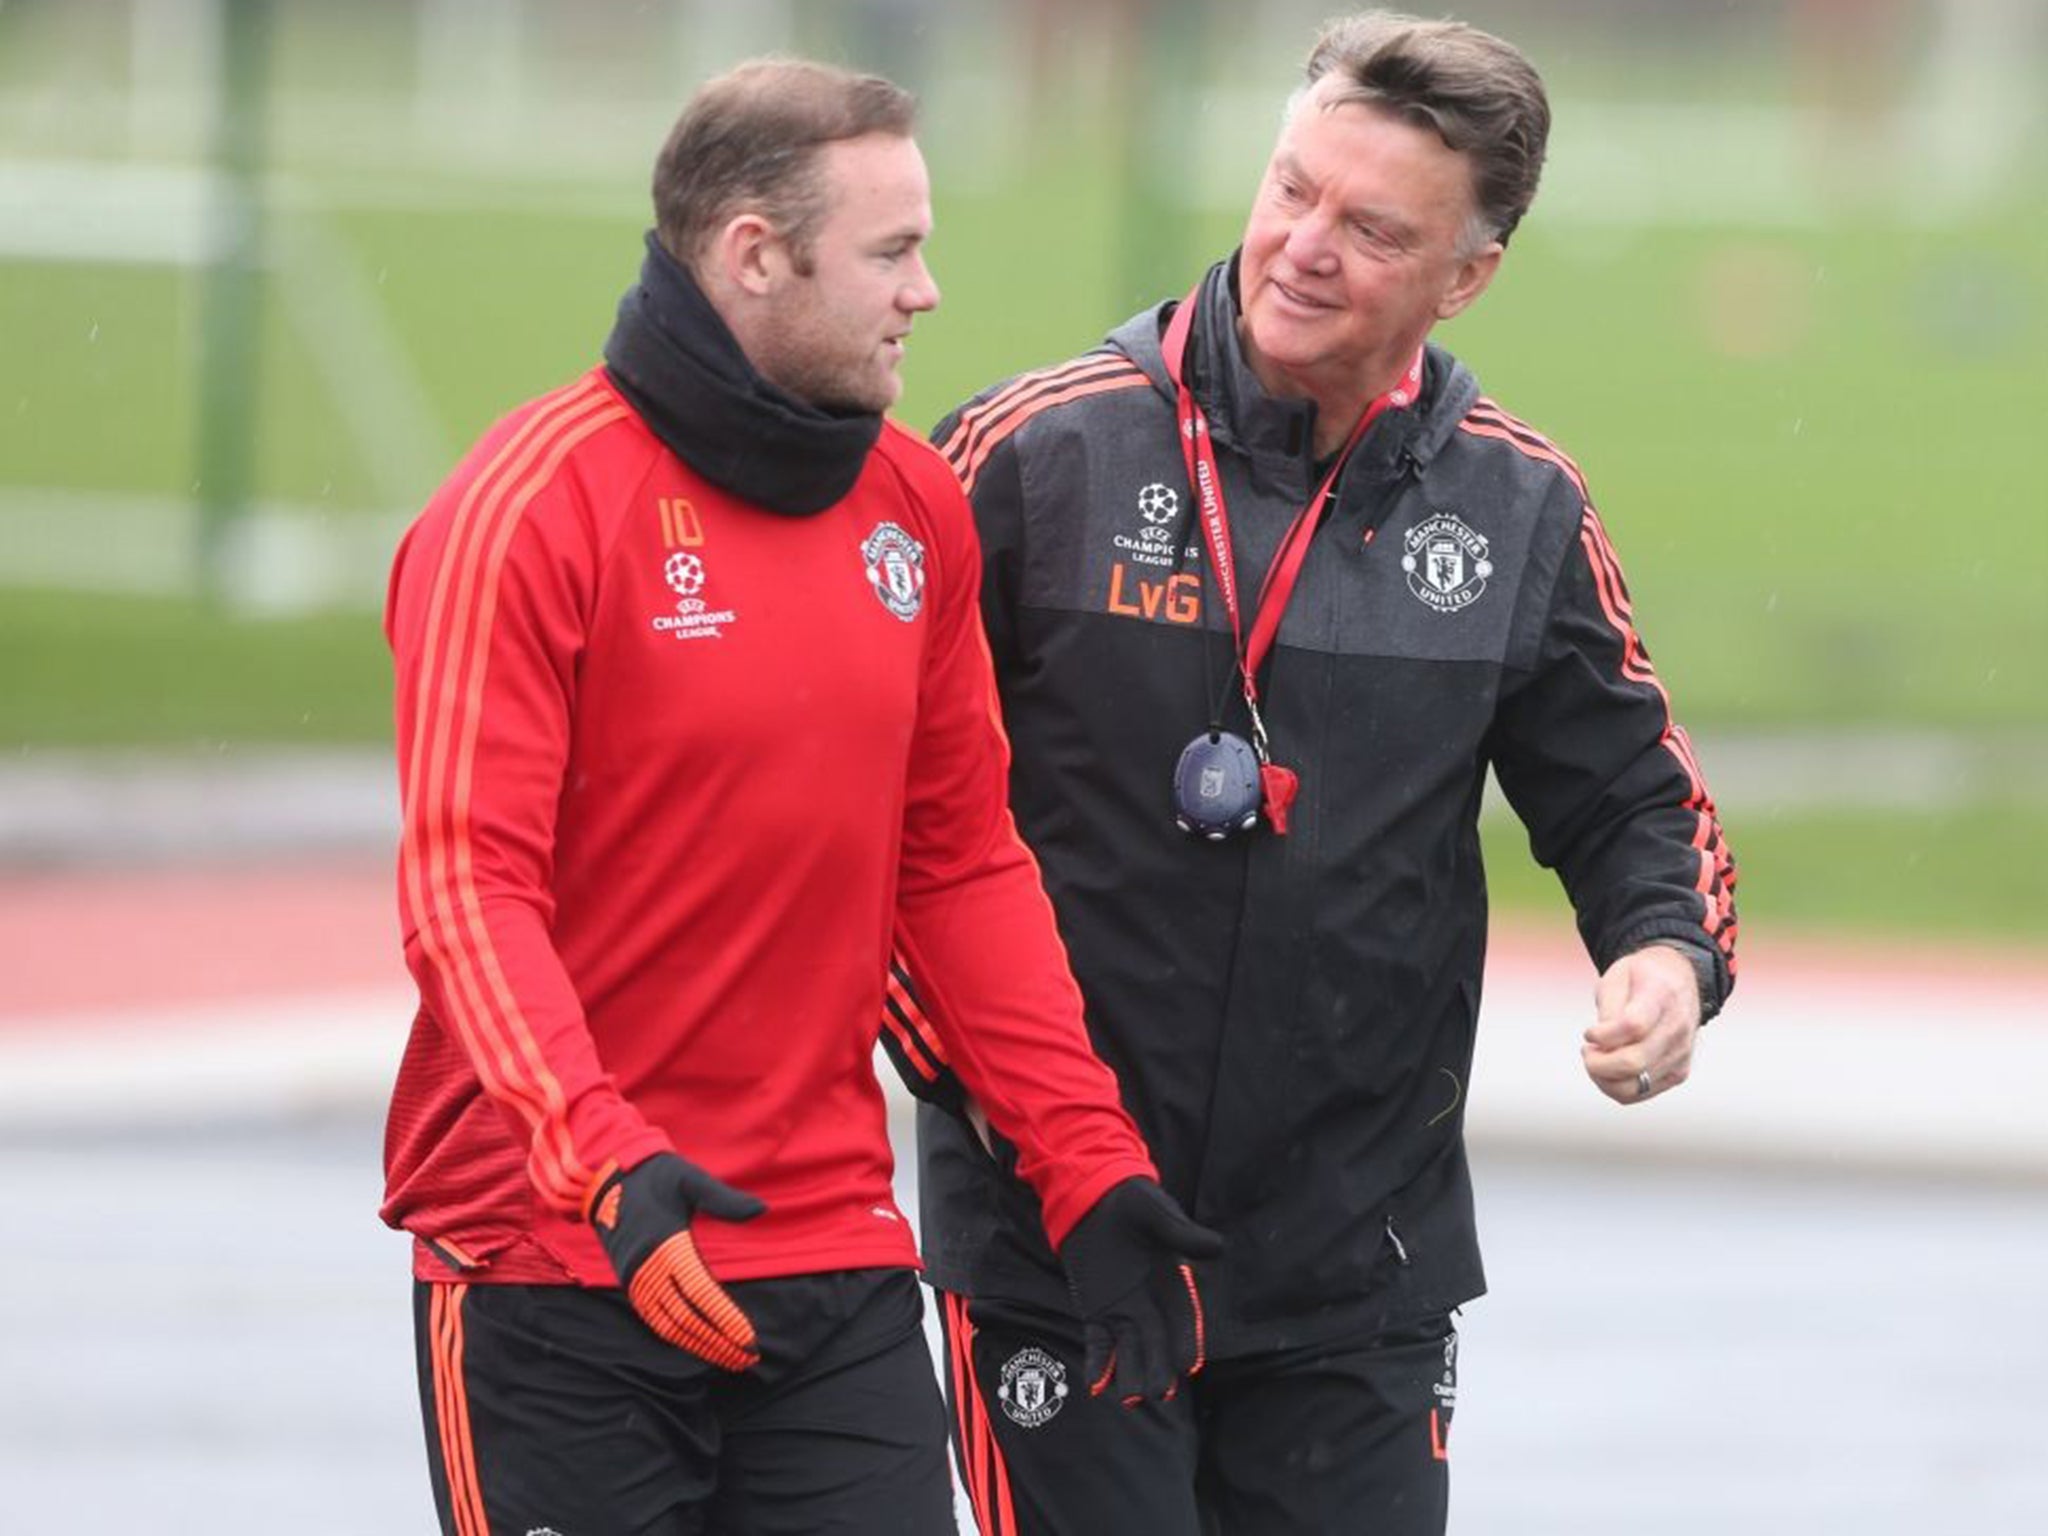 Wayne Rooney and van Gaal in action during a first team training session at Aon Training Complex